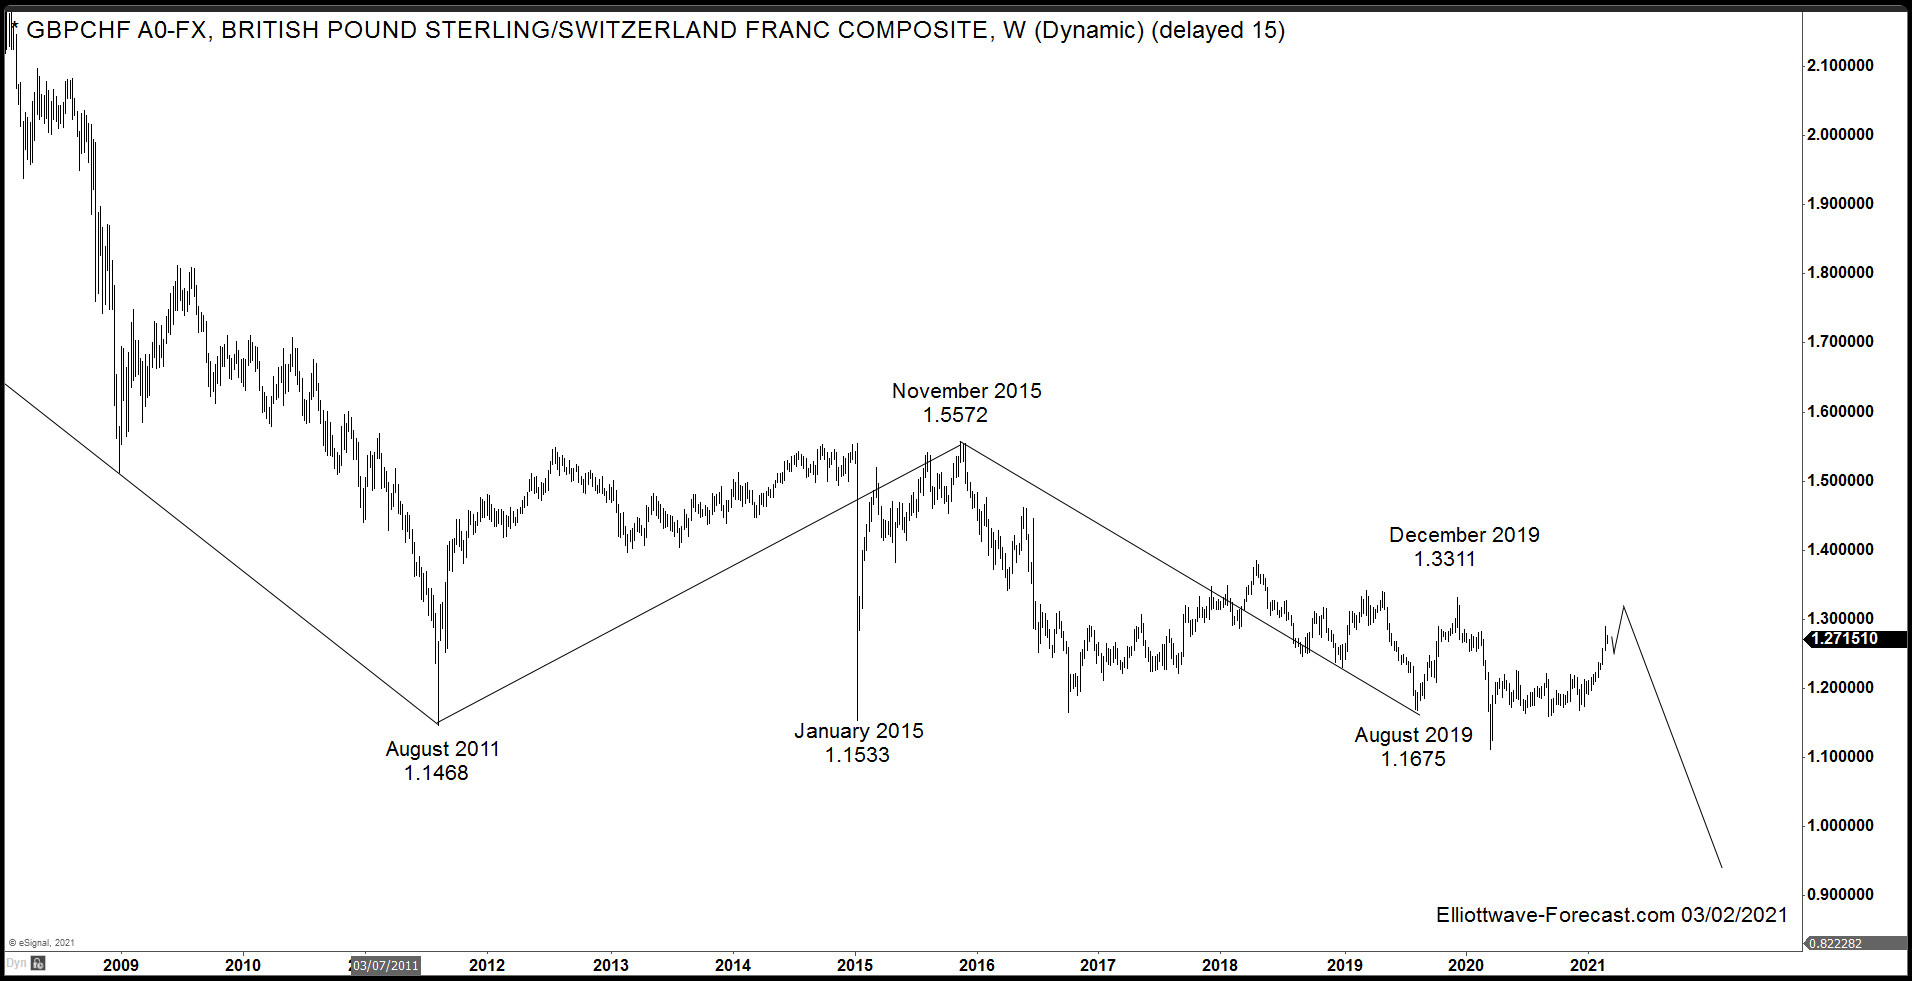 The $GBPCHF Long Term Cycles & Swings